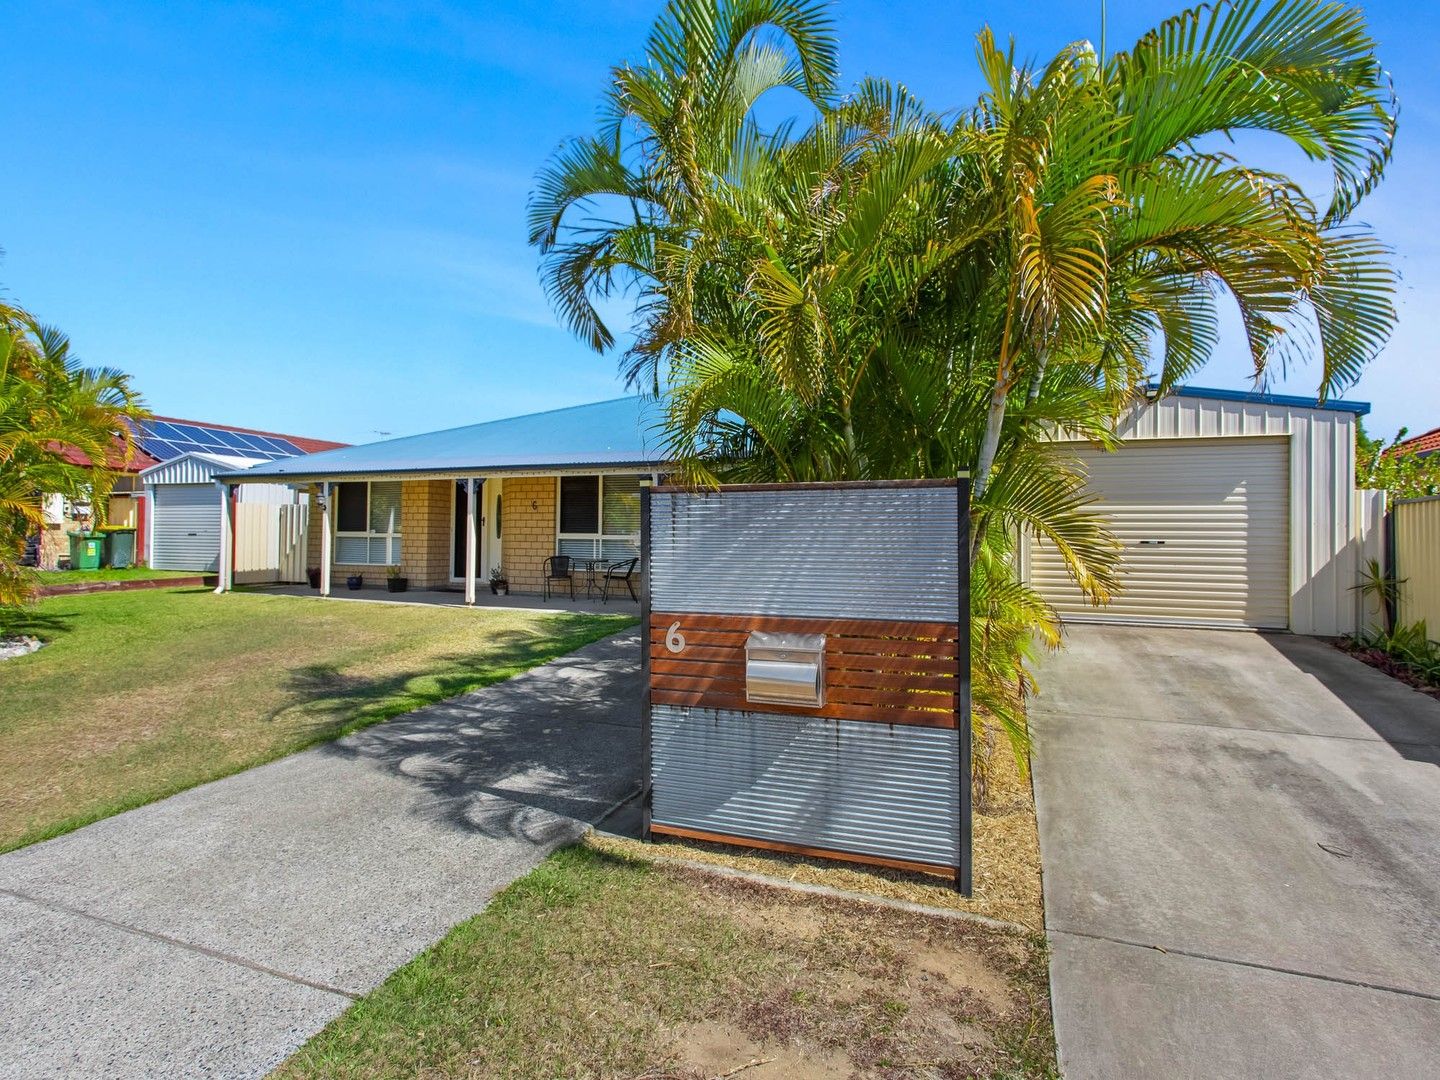 3 bedrooms House in 6 Cadaga Place CABOOLTURE QLD, 4510